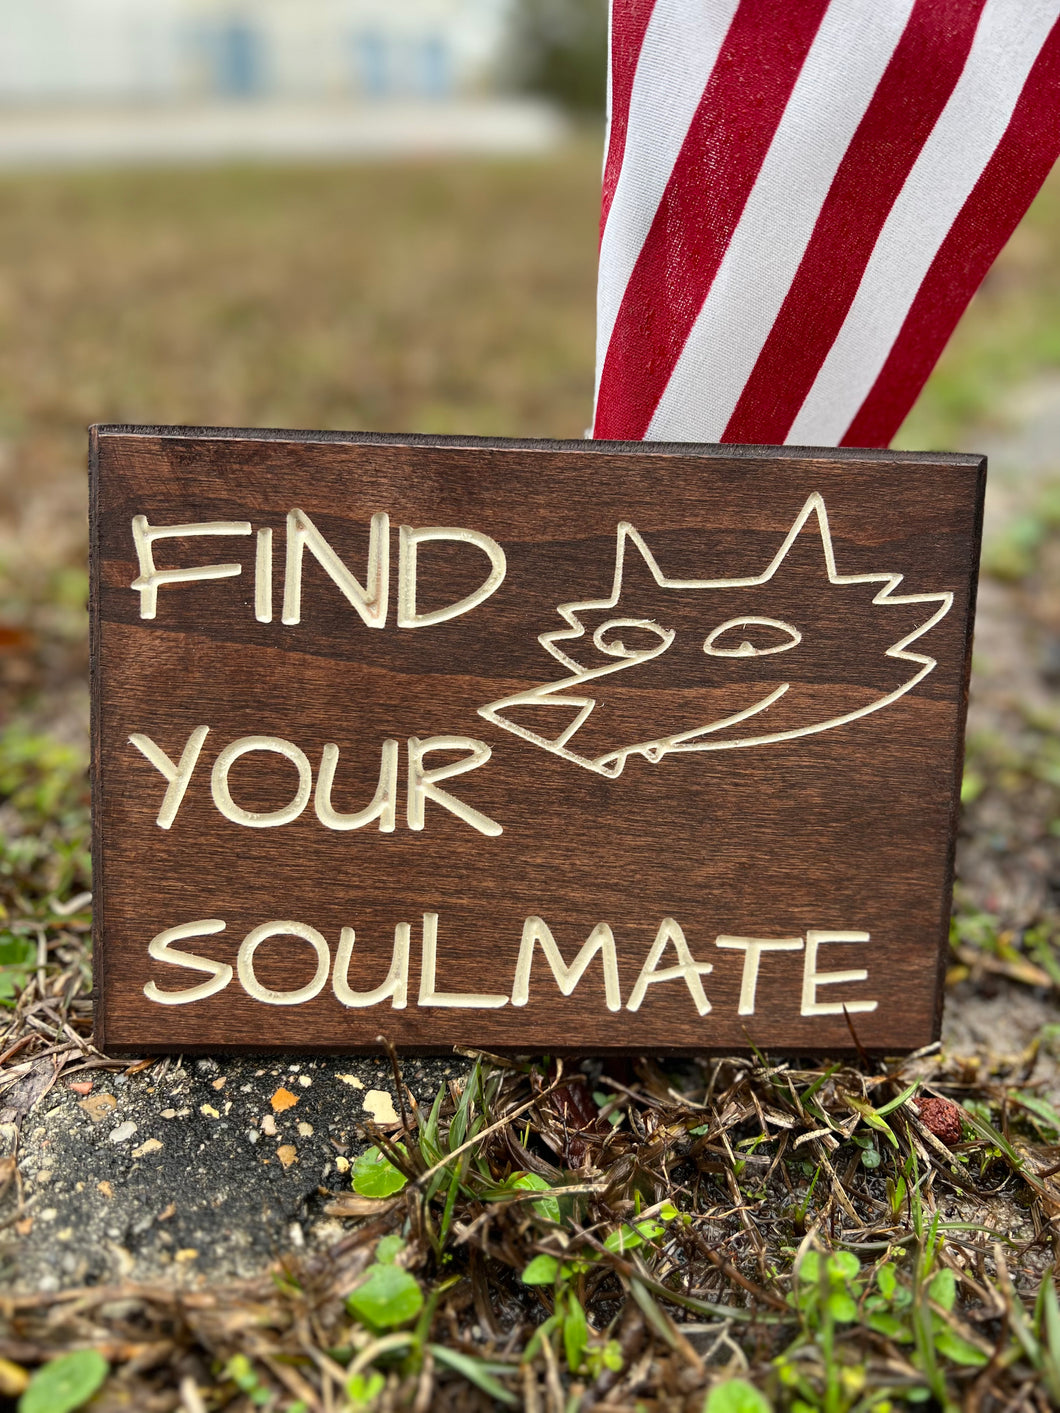 Find your Soulmate w/ Spirit Guide 2.0